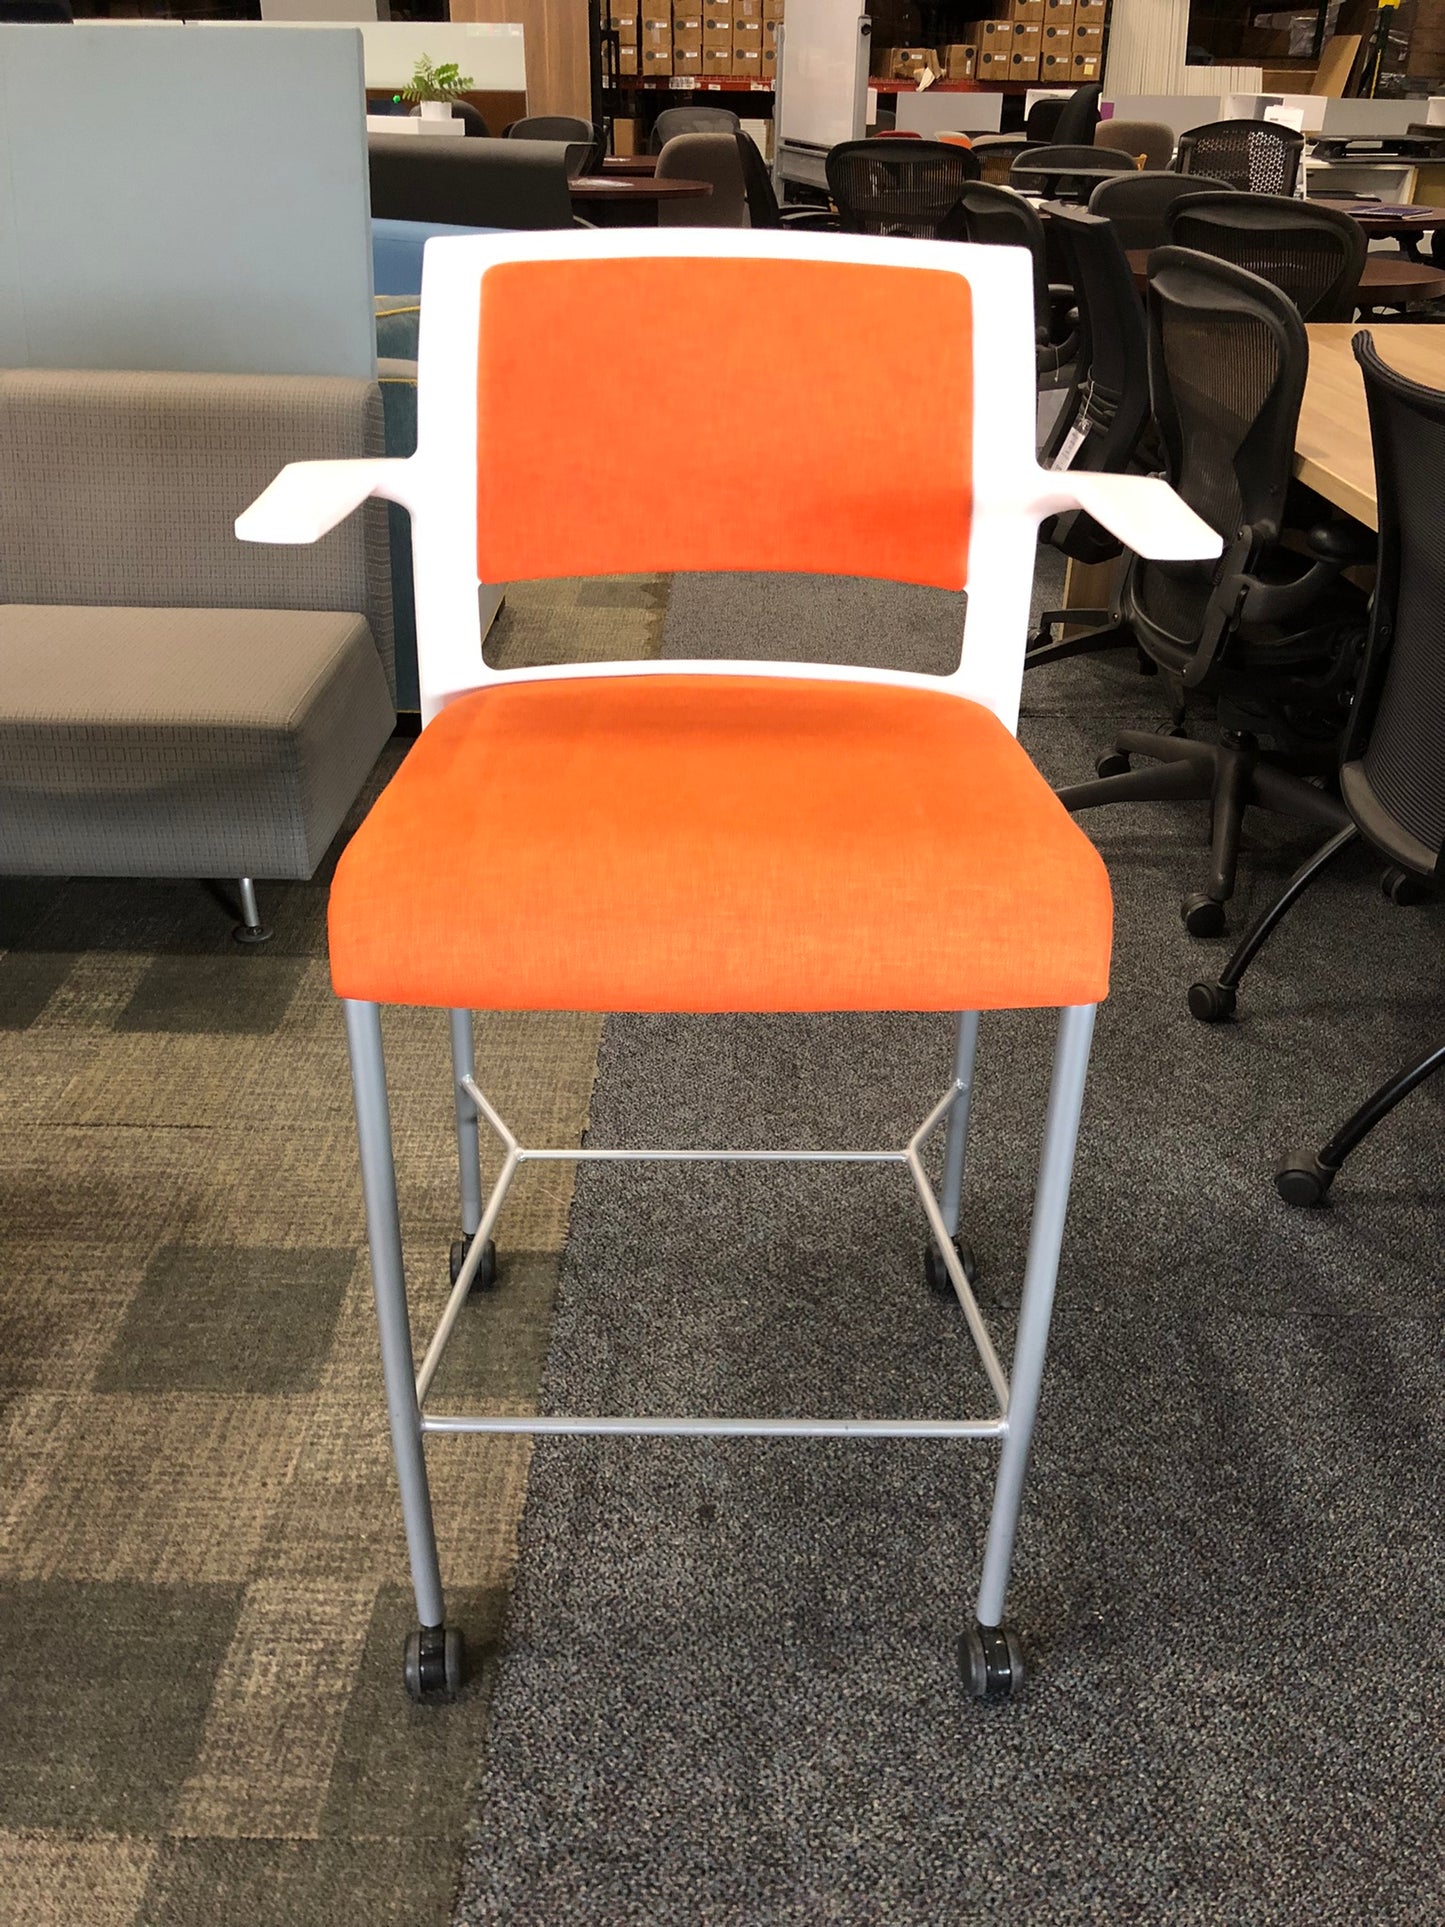 STEELCASE MOVE STOOL WITH CASTERS